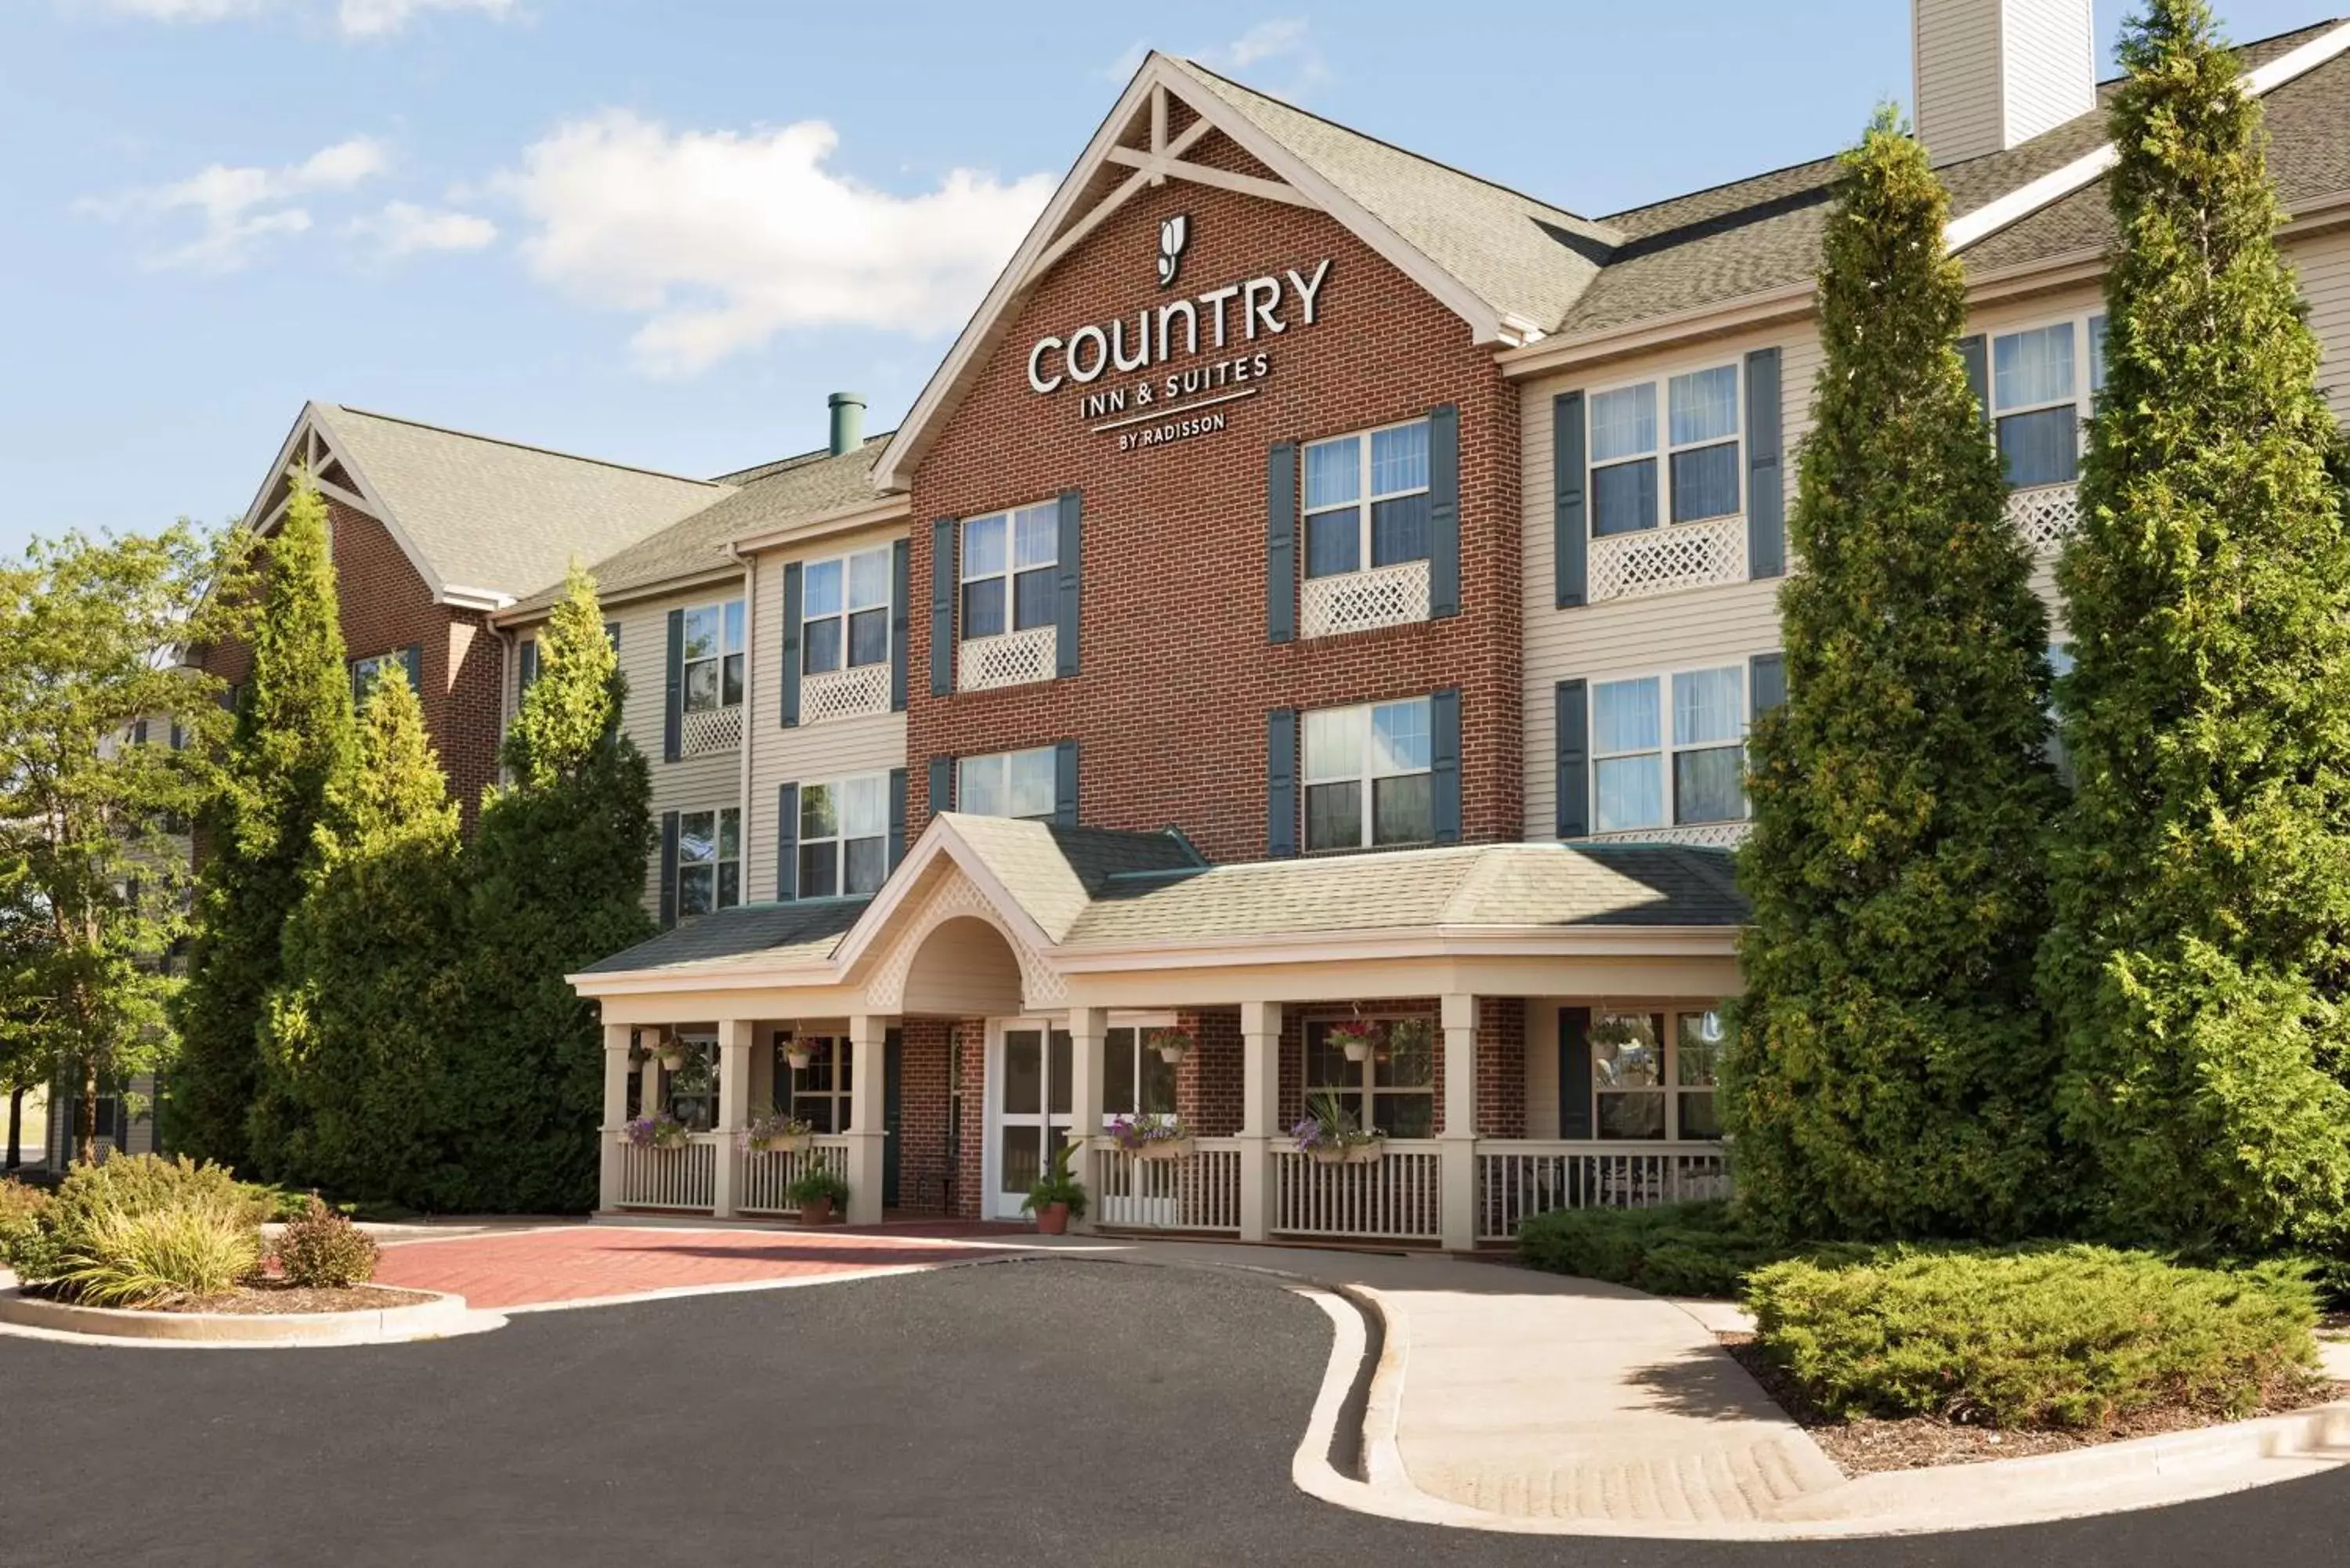 Property Building in Country Inn & Suites by Radisson, Sycamore, IL